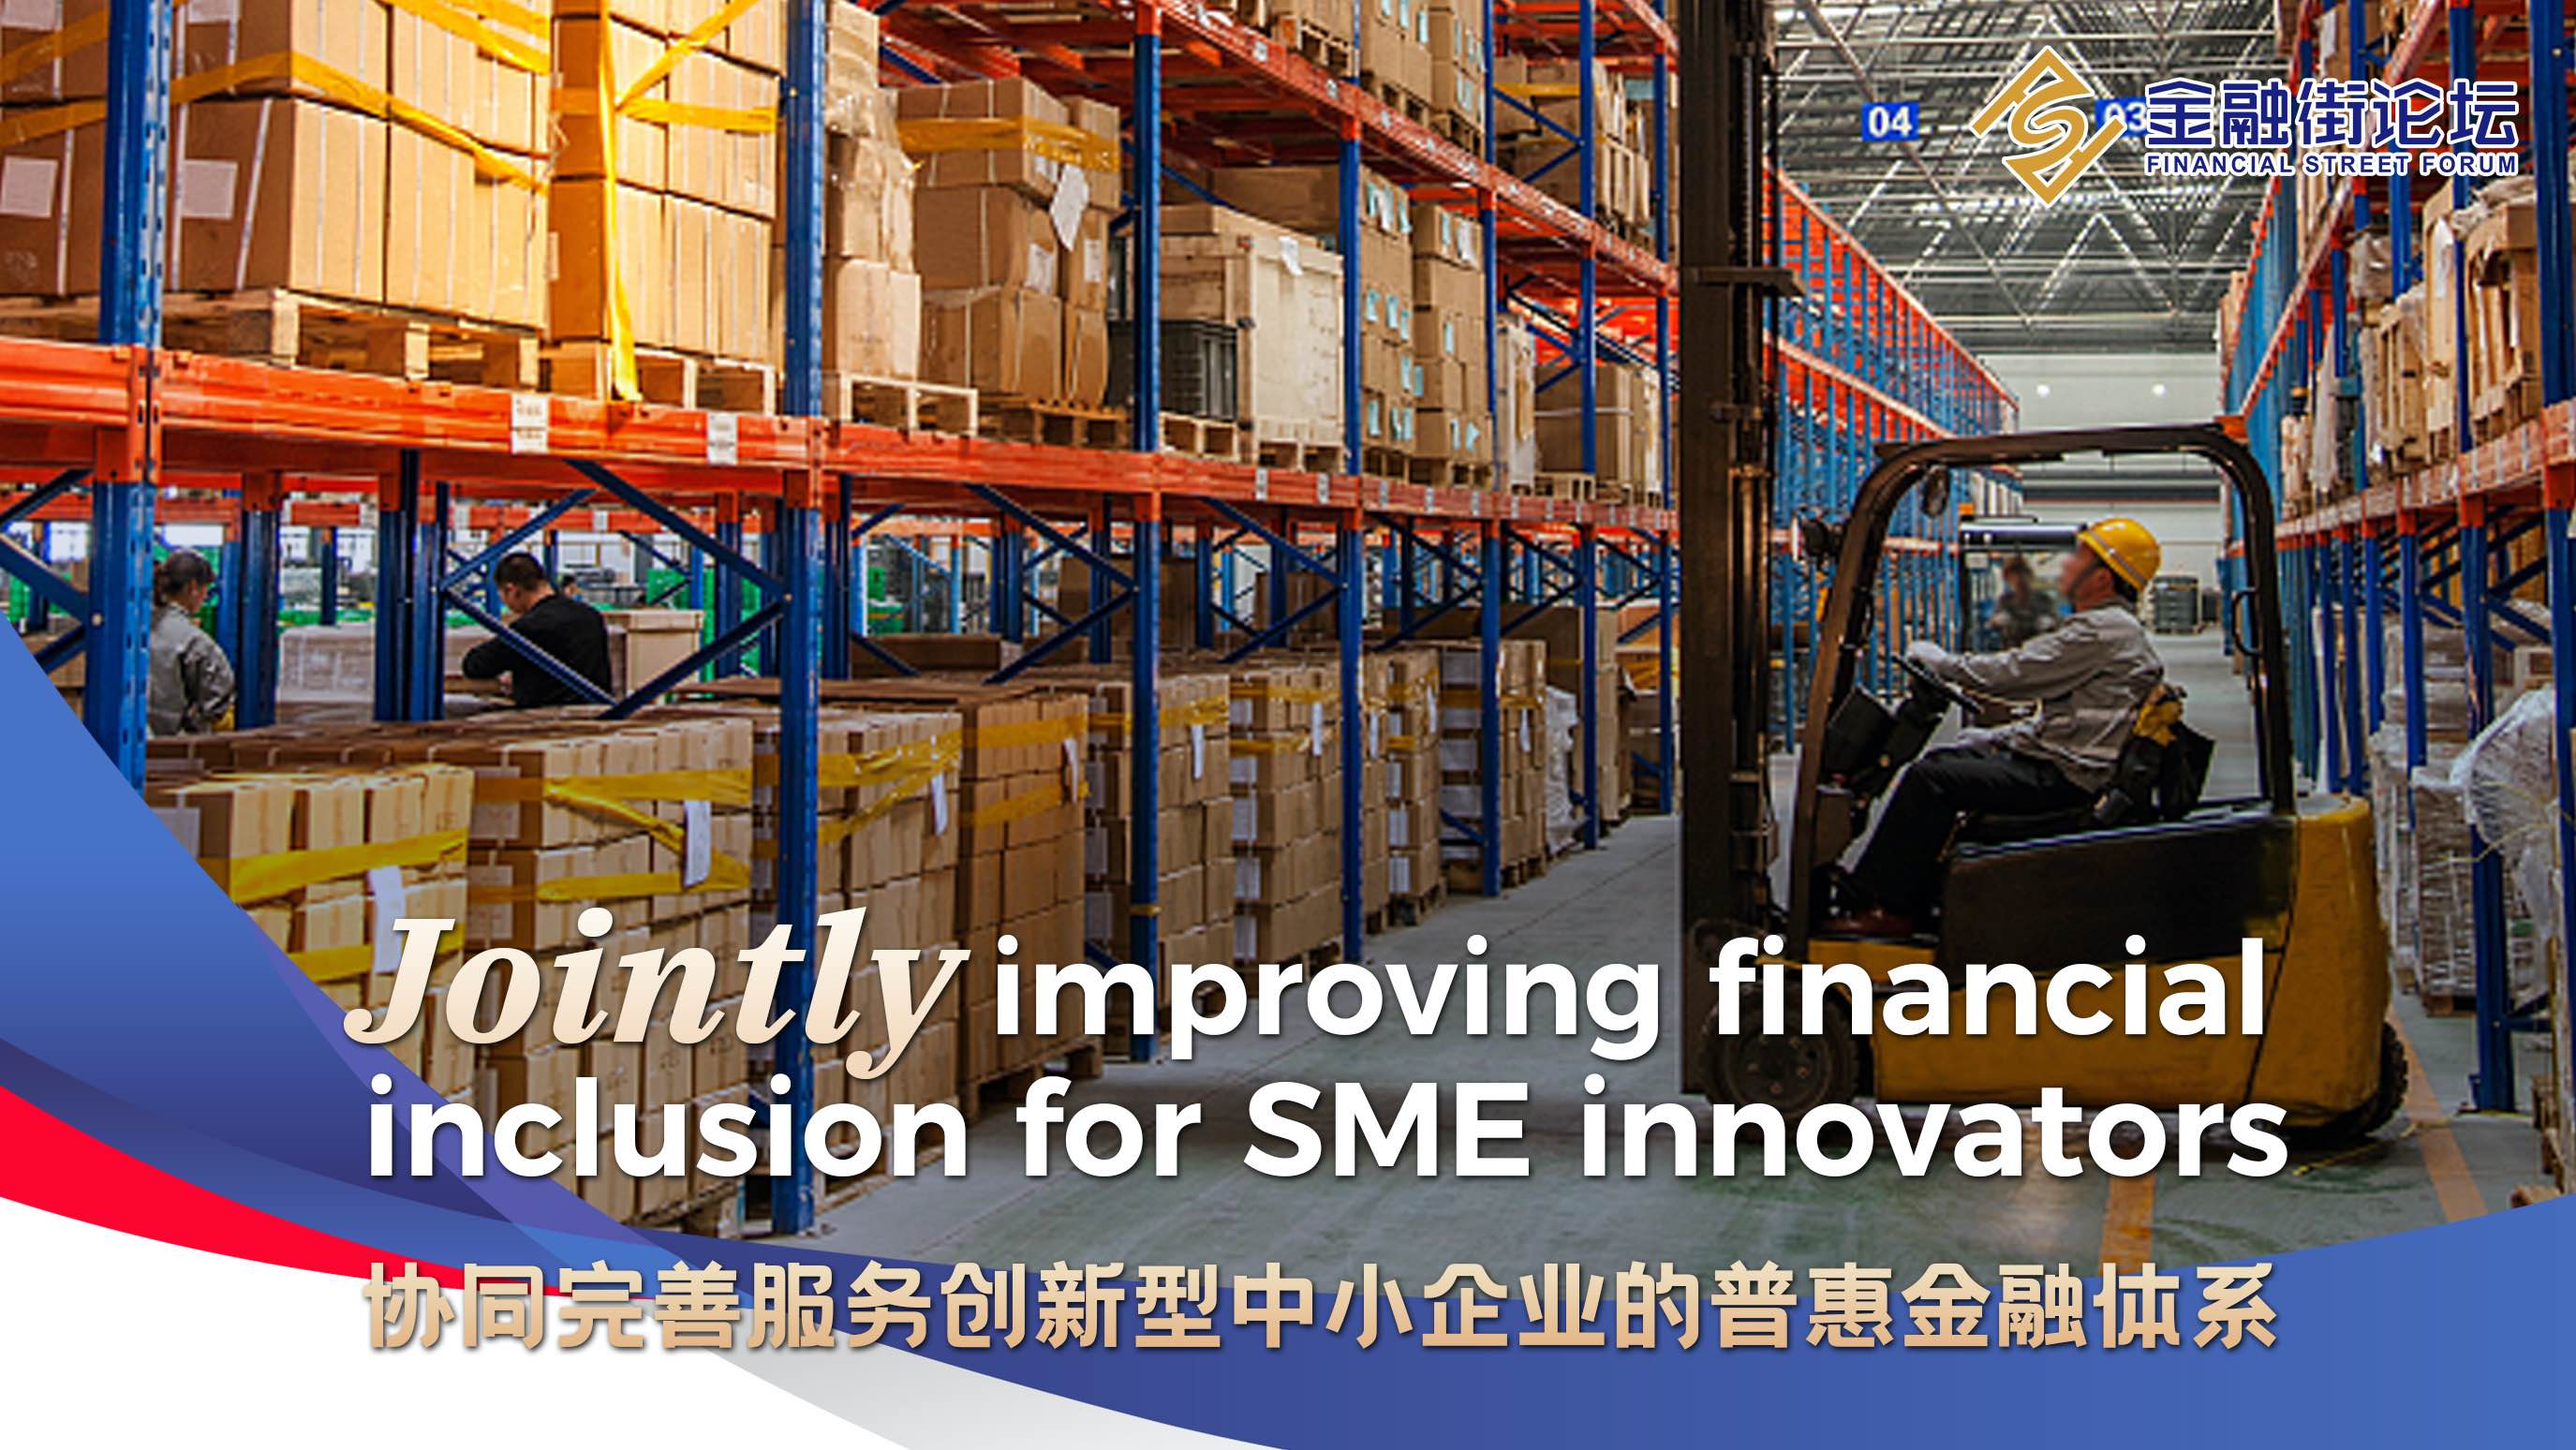 Live: Jointly improving financial inclusion for SME innovators